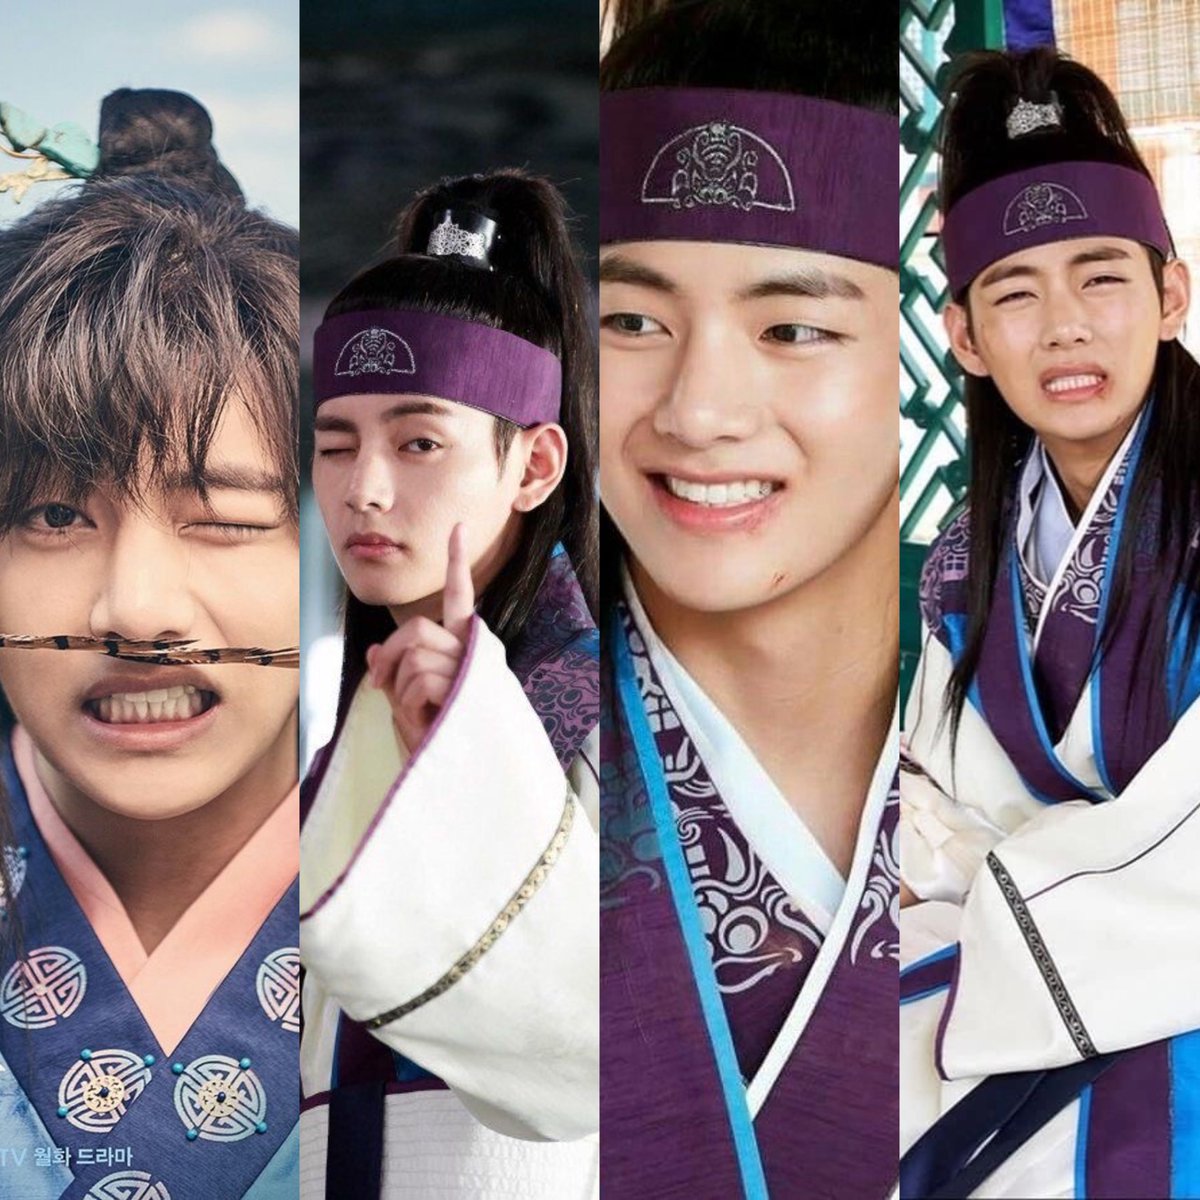 🎊It's been 2700 days since Taehyung graced our screens as the unforgettable Hansung.

Forever our favorite Hwarang warrior!

Hwarang 2700 Days

#2700DaysWithHansung
#태형이가한성된날_화랑2700일